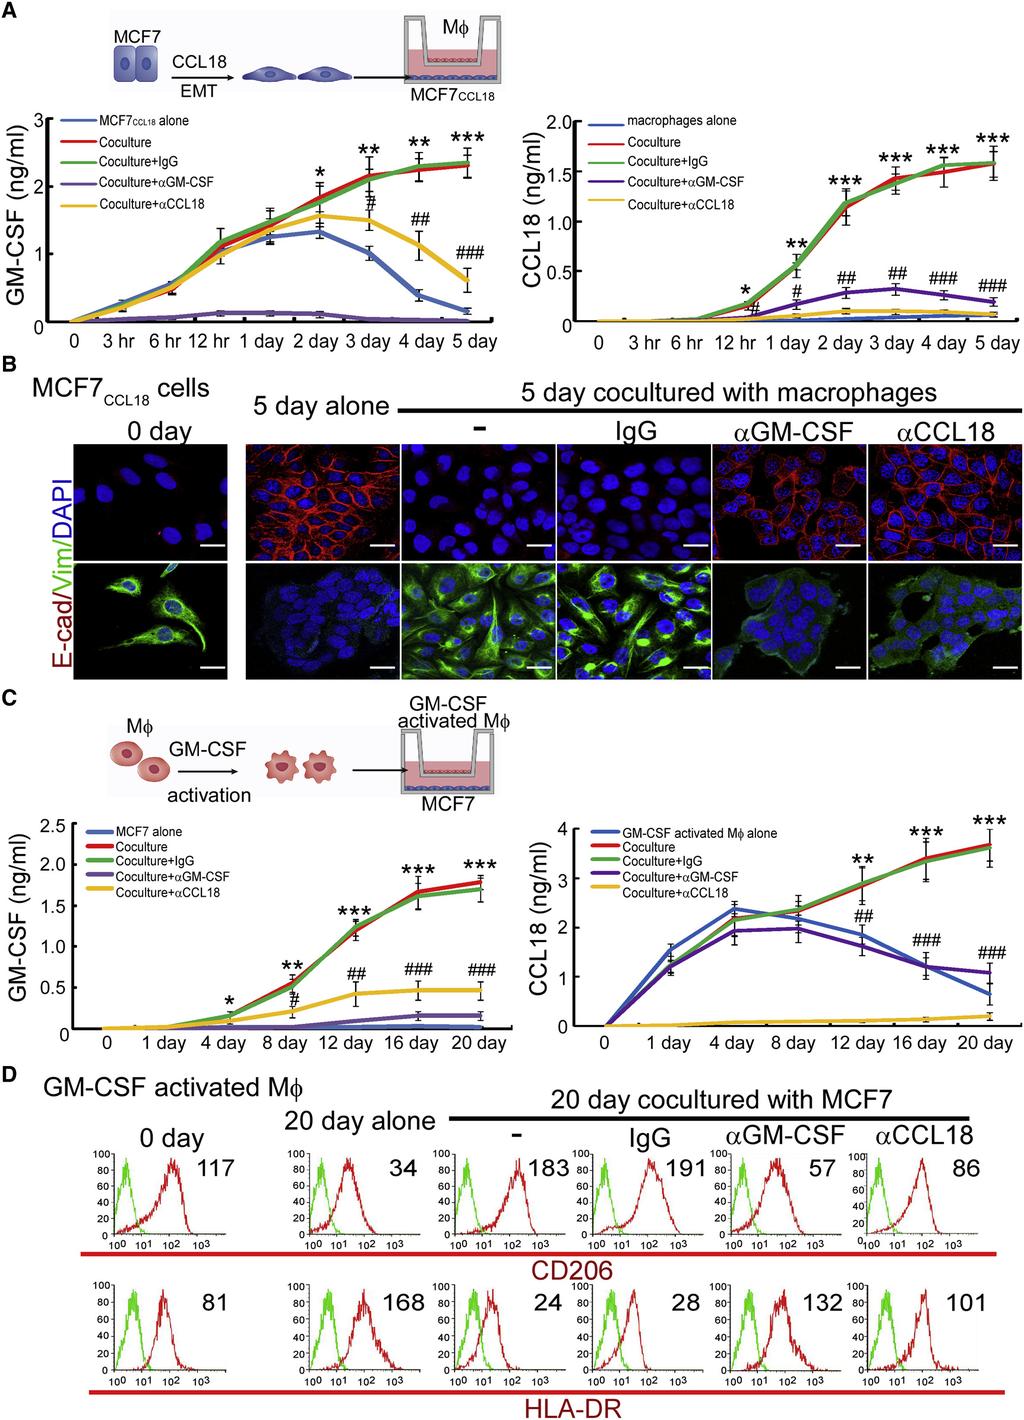 Cancer Cell GM-CSF-CCL18 Loop Promotes Breast Cancer Metastasis Figure 5.